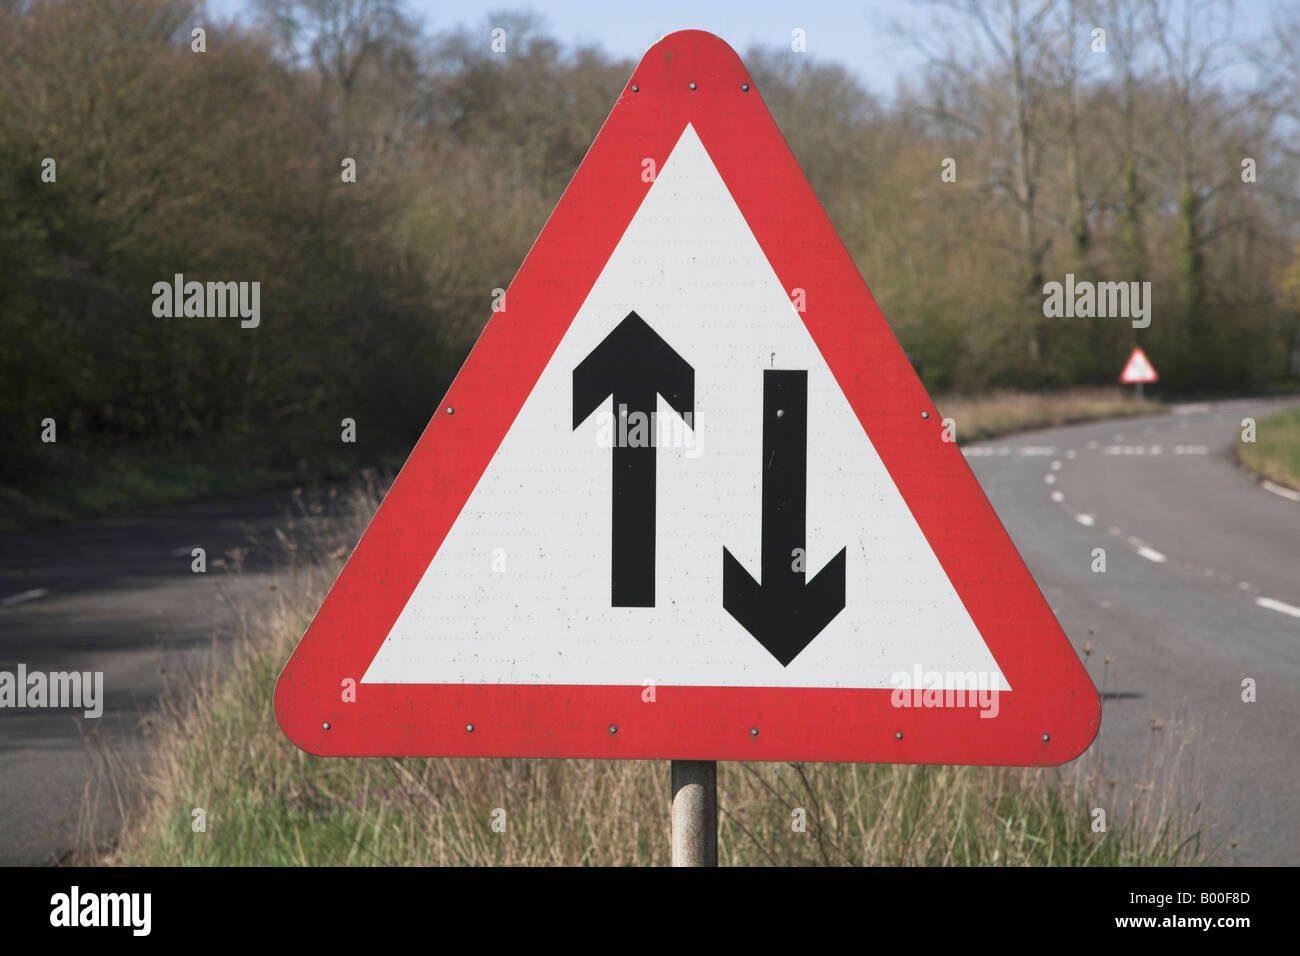 Red triangle sign two way traffic Stock Photo